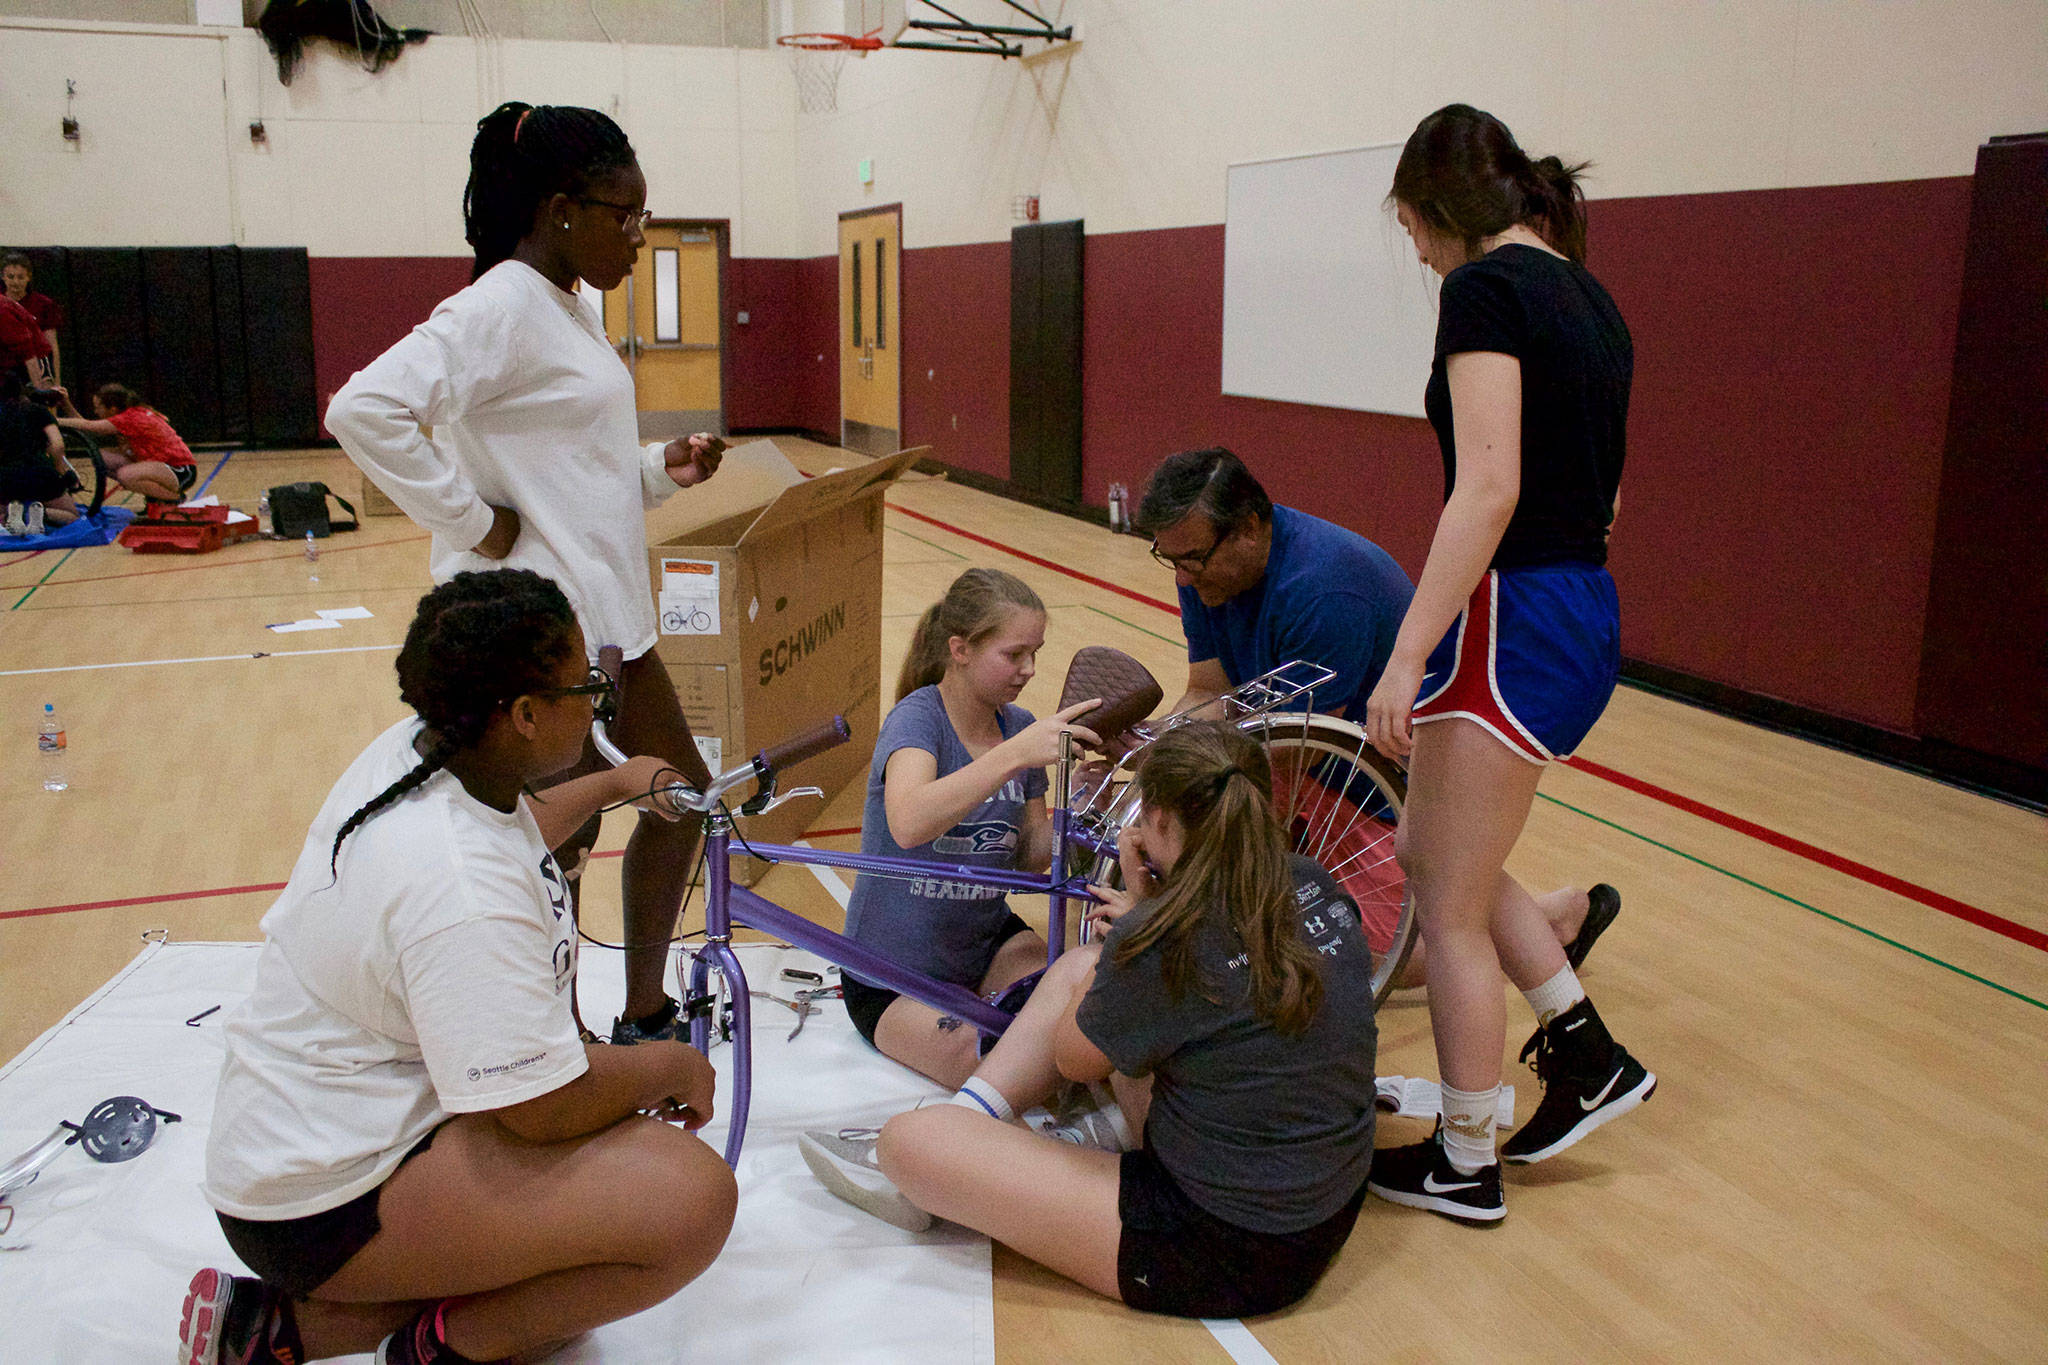 MIHS girls’ volleyball team bonds by building bikes